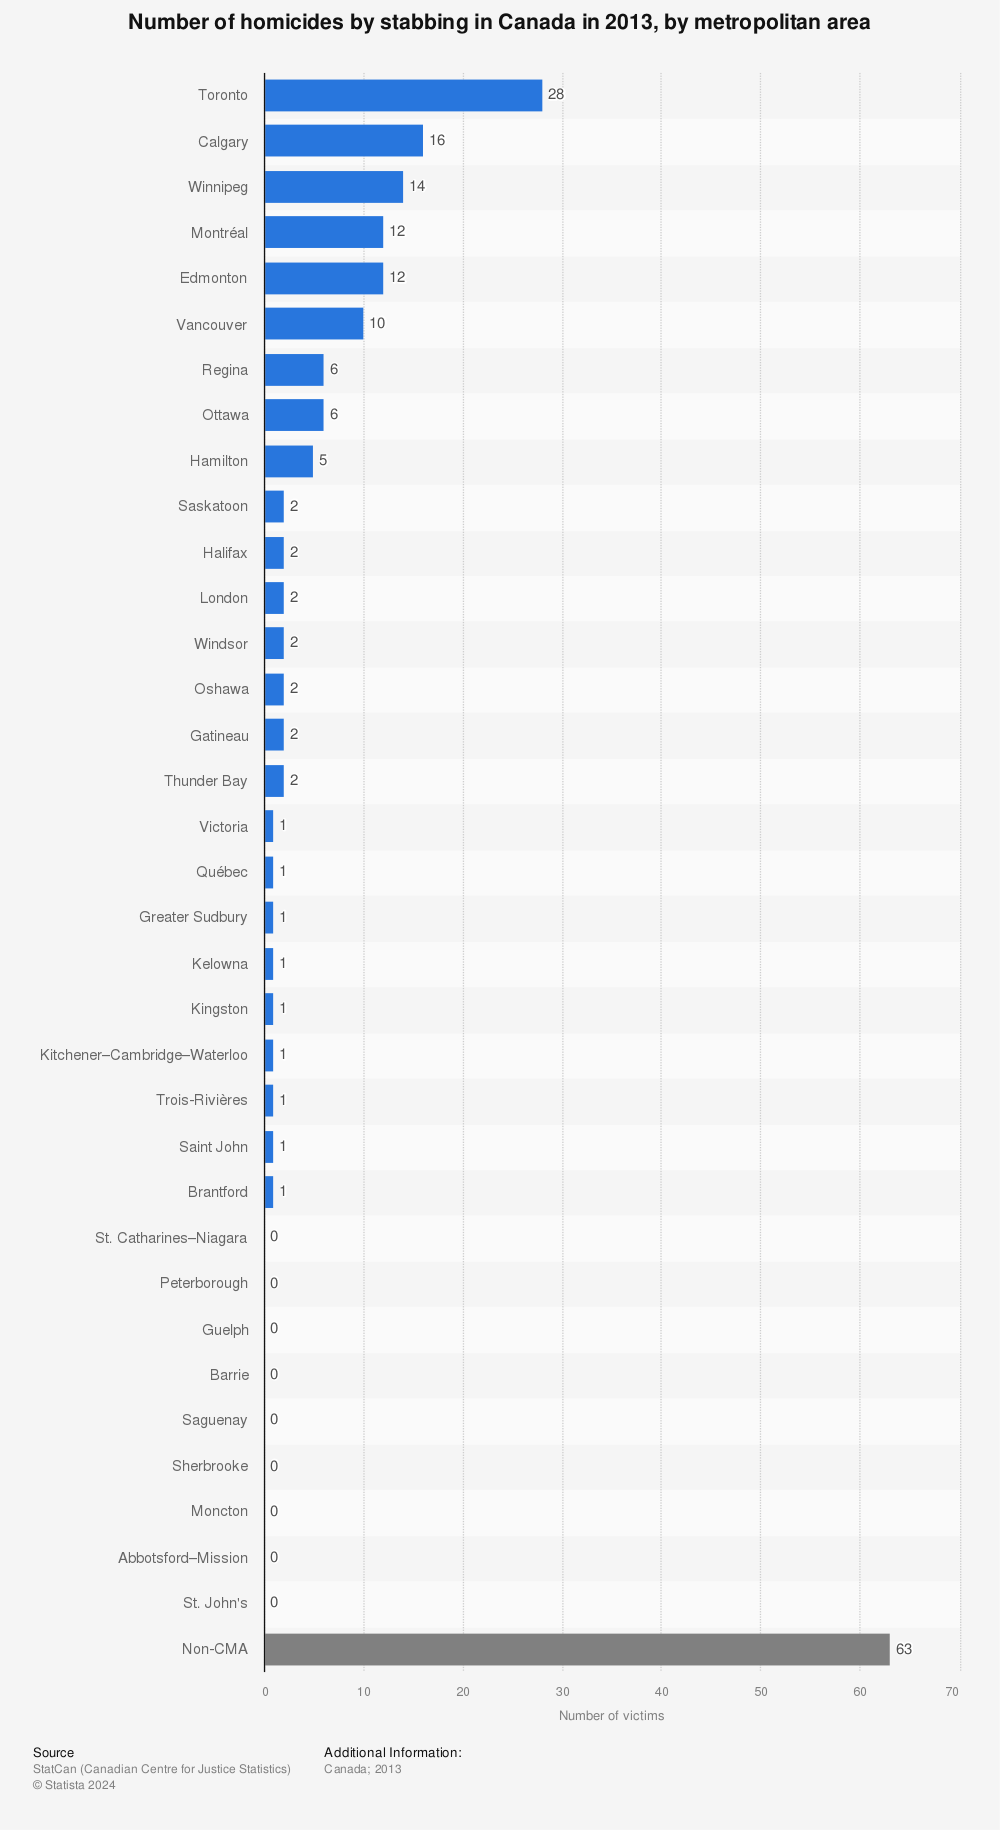 Statistic: Number of homicides by stabbing in Canada in 2013, by metropolitan area | Statista